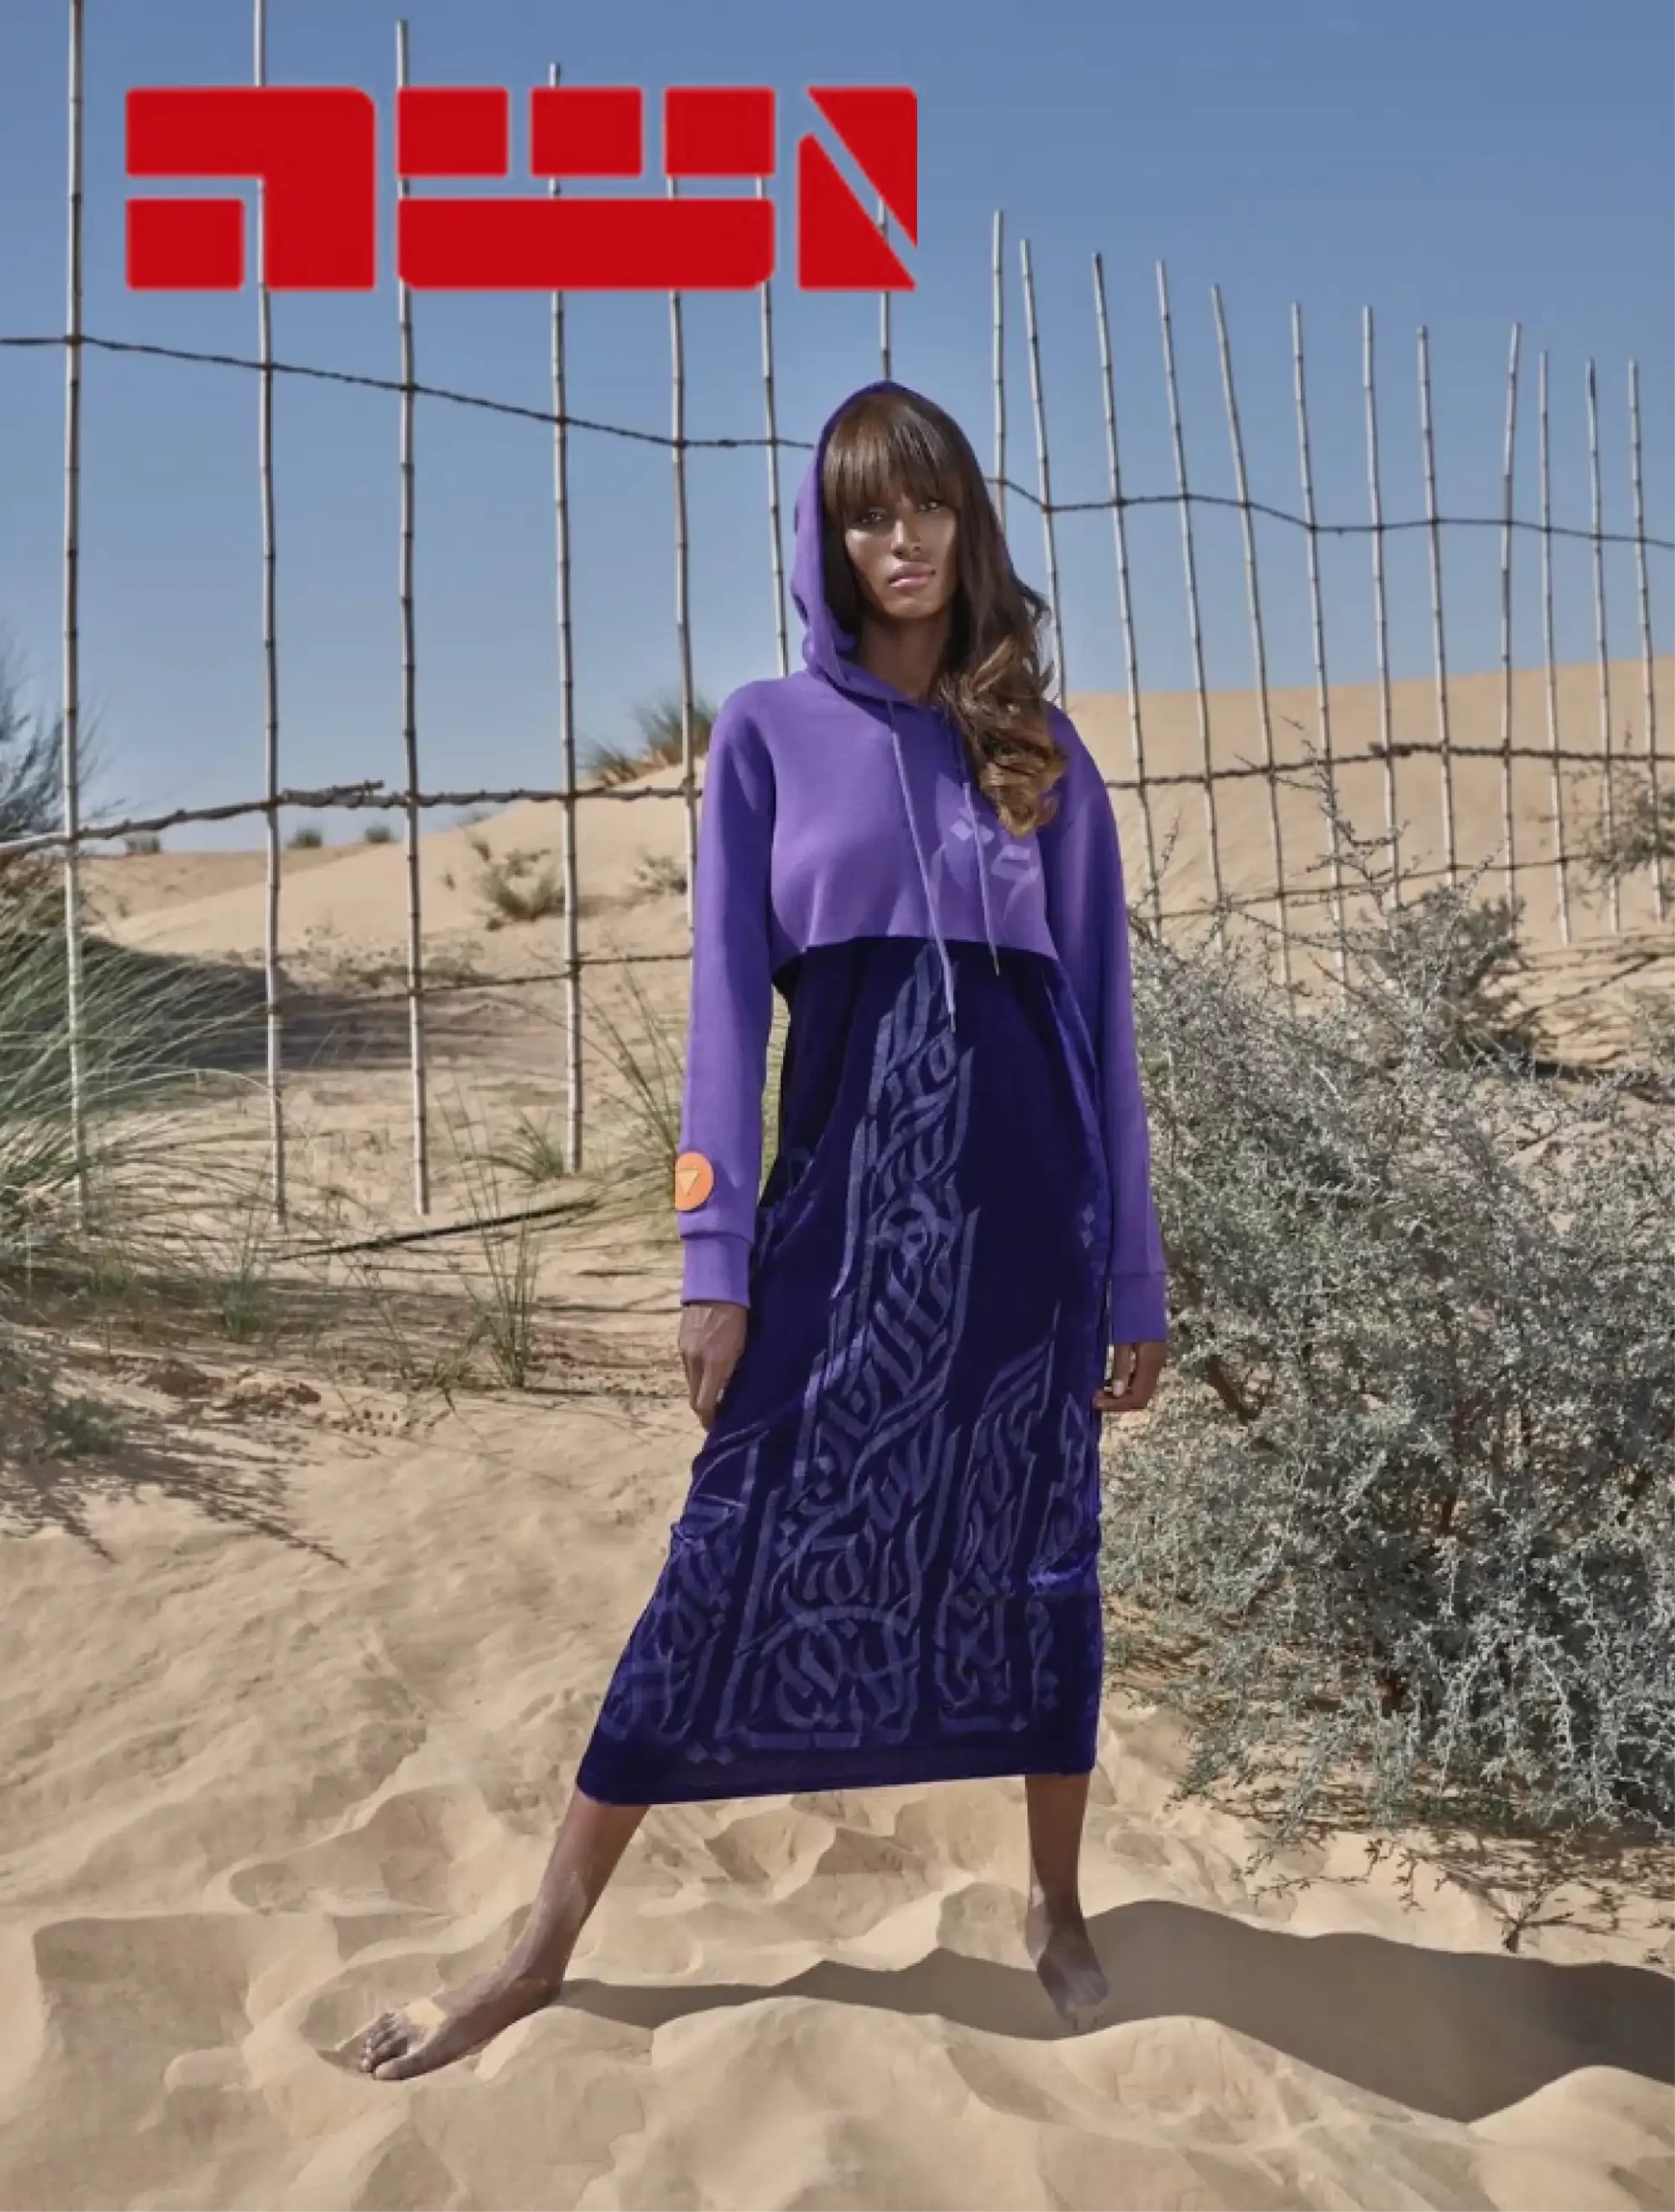 Dubai-based model Chanel Ayan was photographed in a FXLB dress hand-painted by a calligrapher Diaa Allam